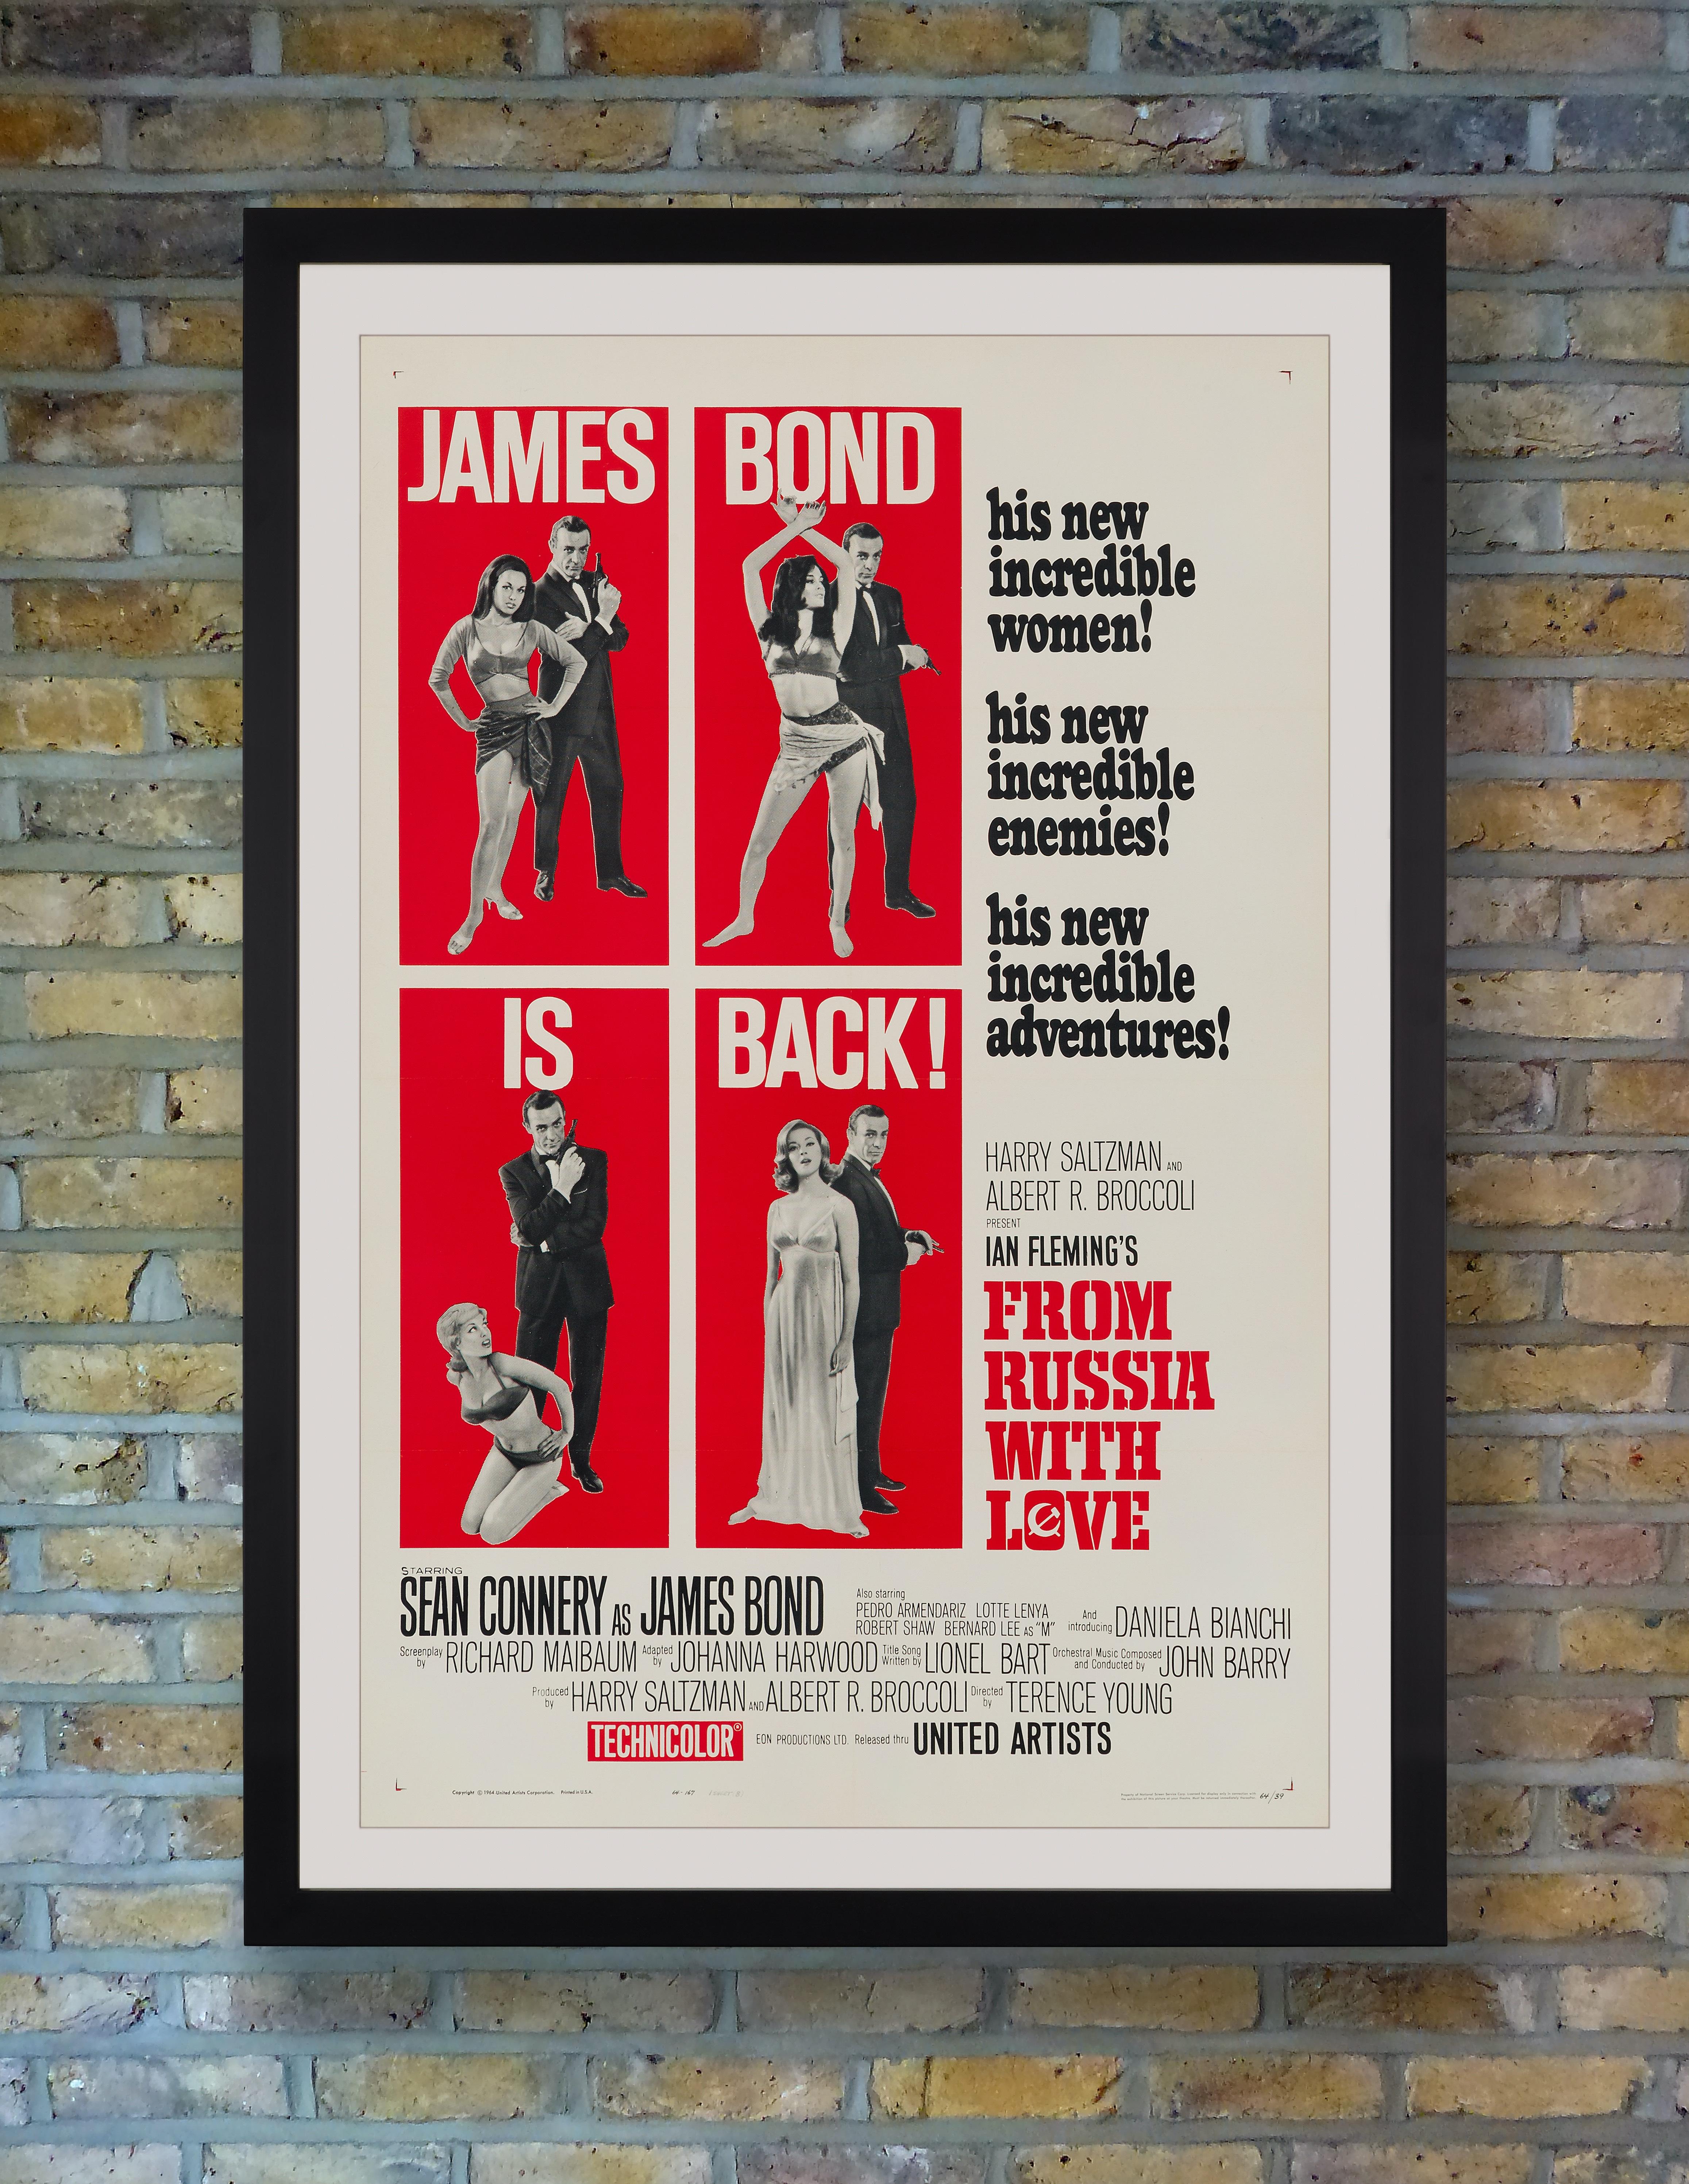 In Sean Connery's second outing as James Bond, 'From Russia With Love' saw the British spy battling a secret crime organization known as Spectre. The follow-up to 007's 1962 debut in 'Dr. No,' Terence Young's 'From Russia With Love' further